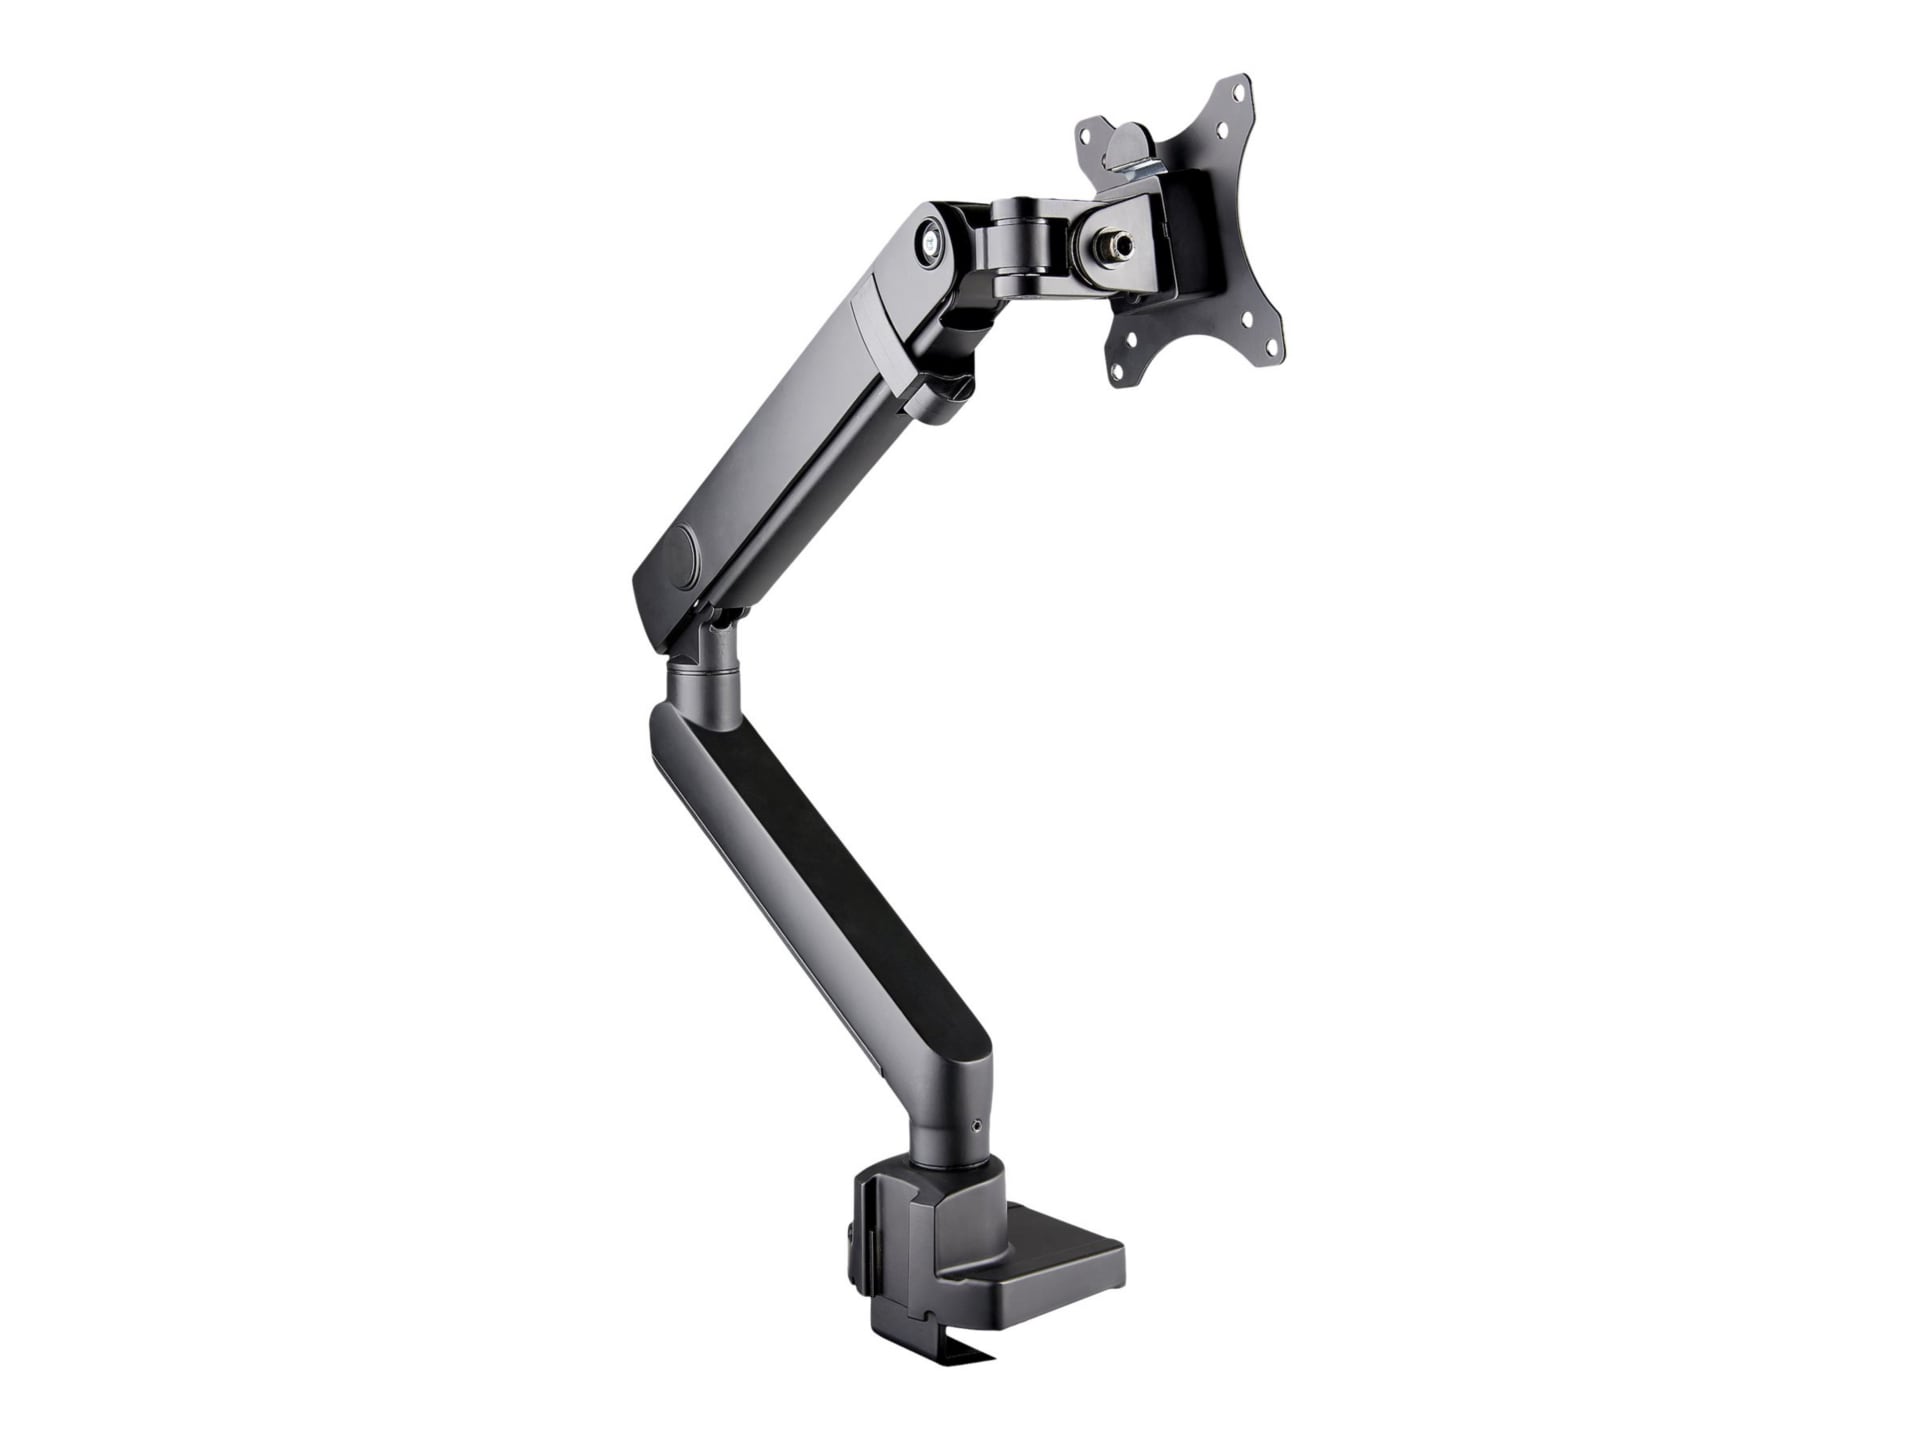 StarTech.com Desk Mount Monitor Arm with USB - Full Motion - 8kg Display